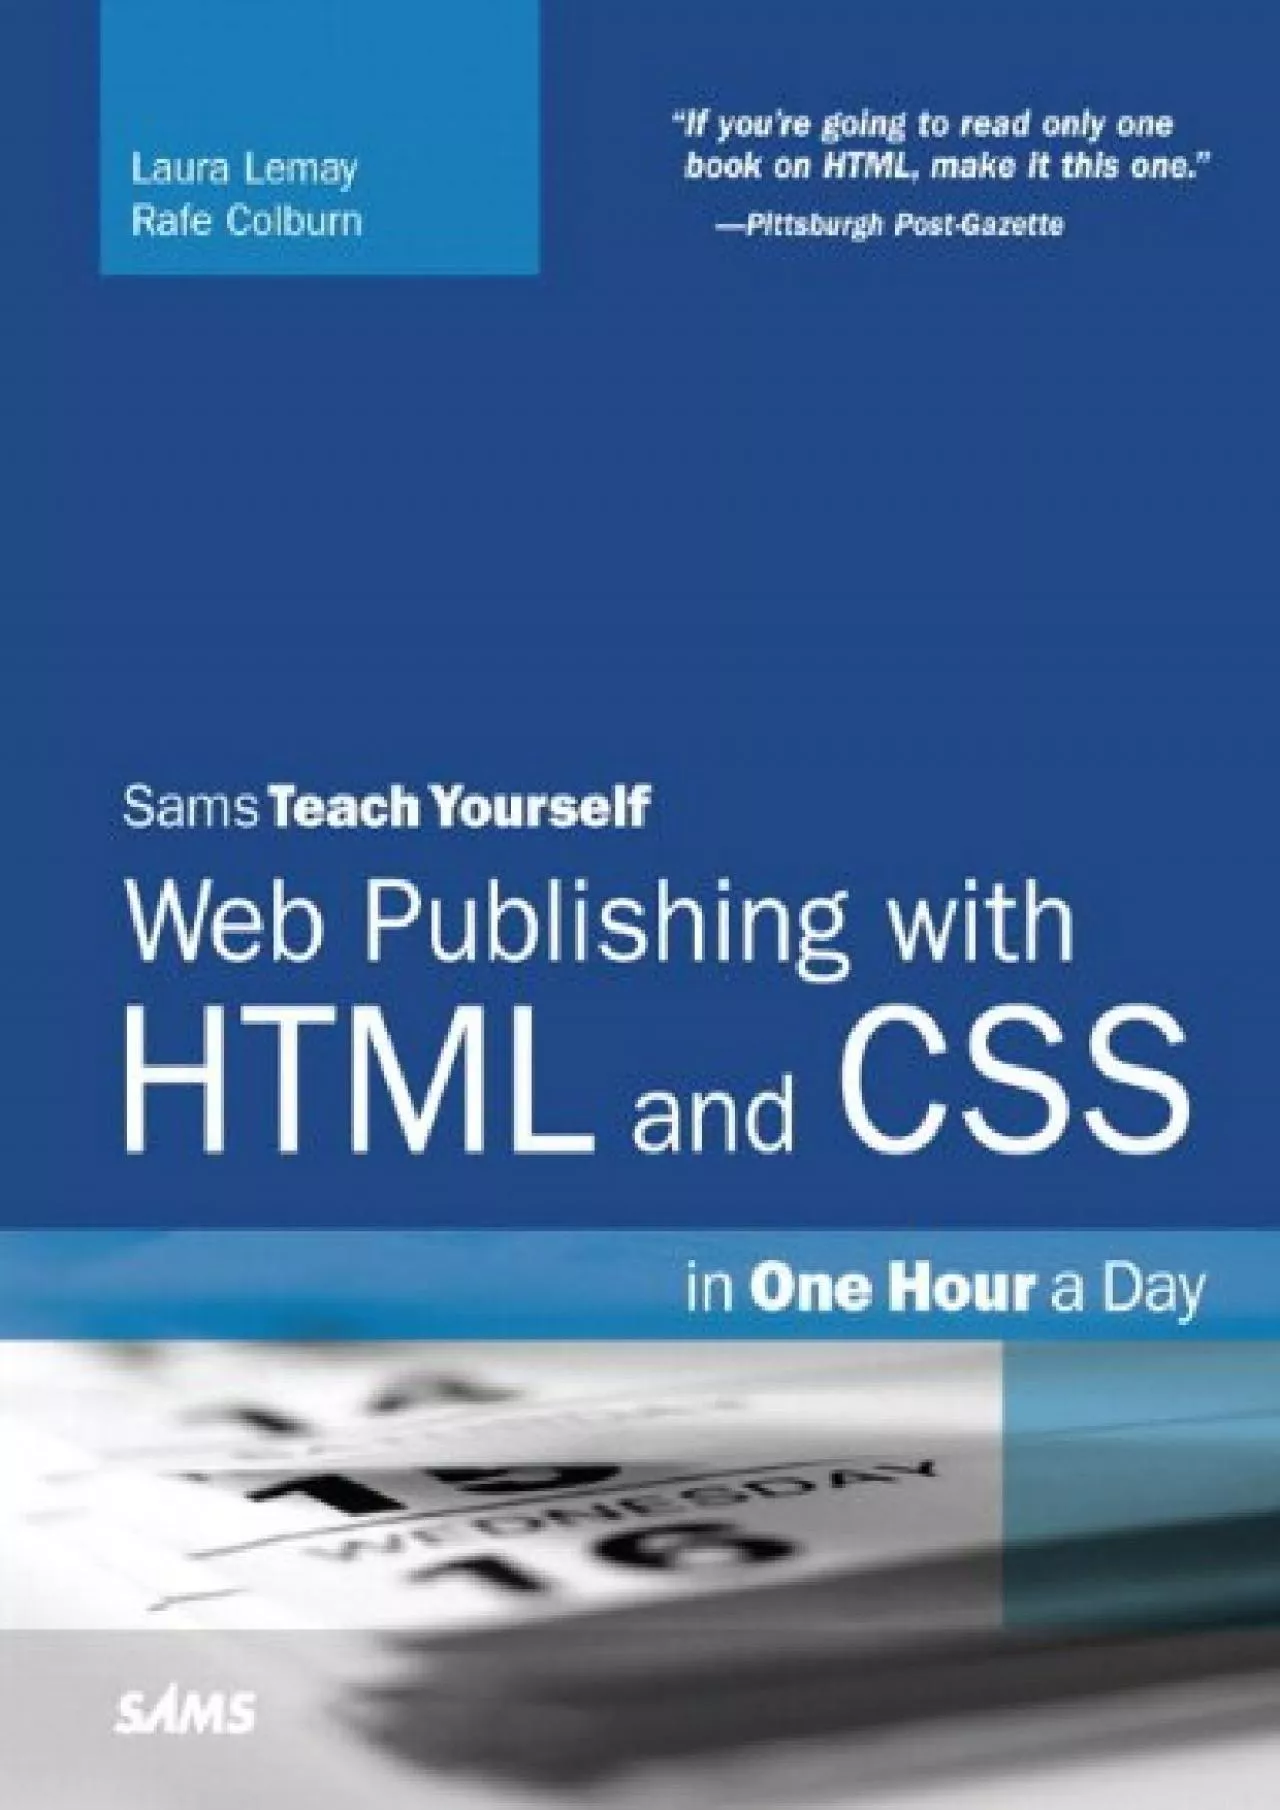 [BEST]-Sams Teach Yourself Web Publishing with HTML and CSS in One Hour a Day